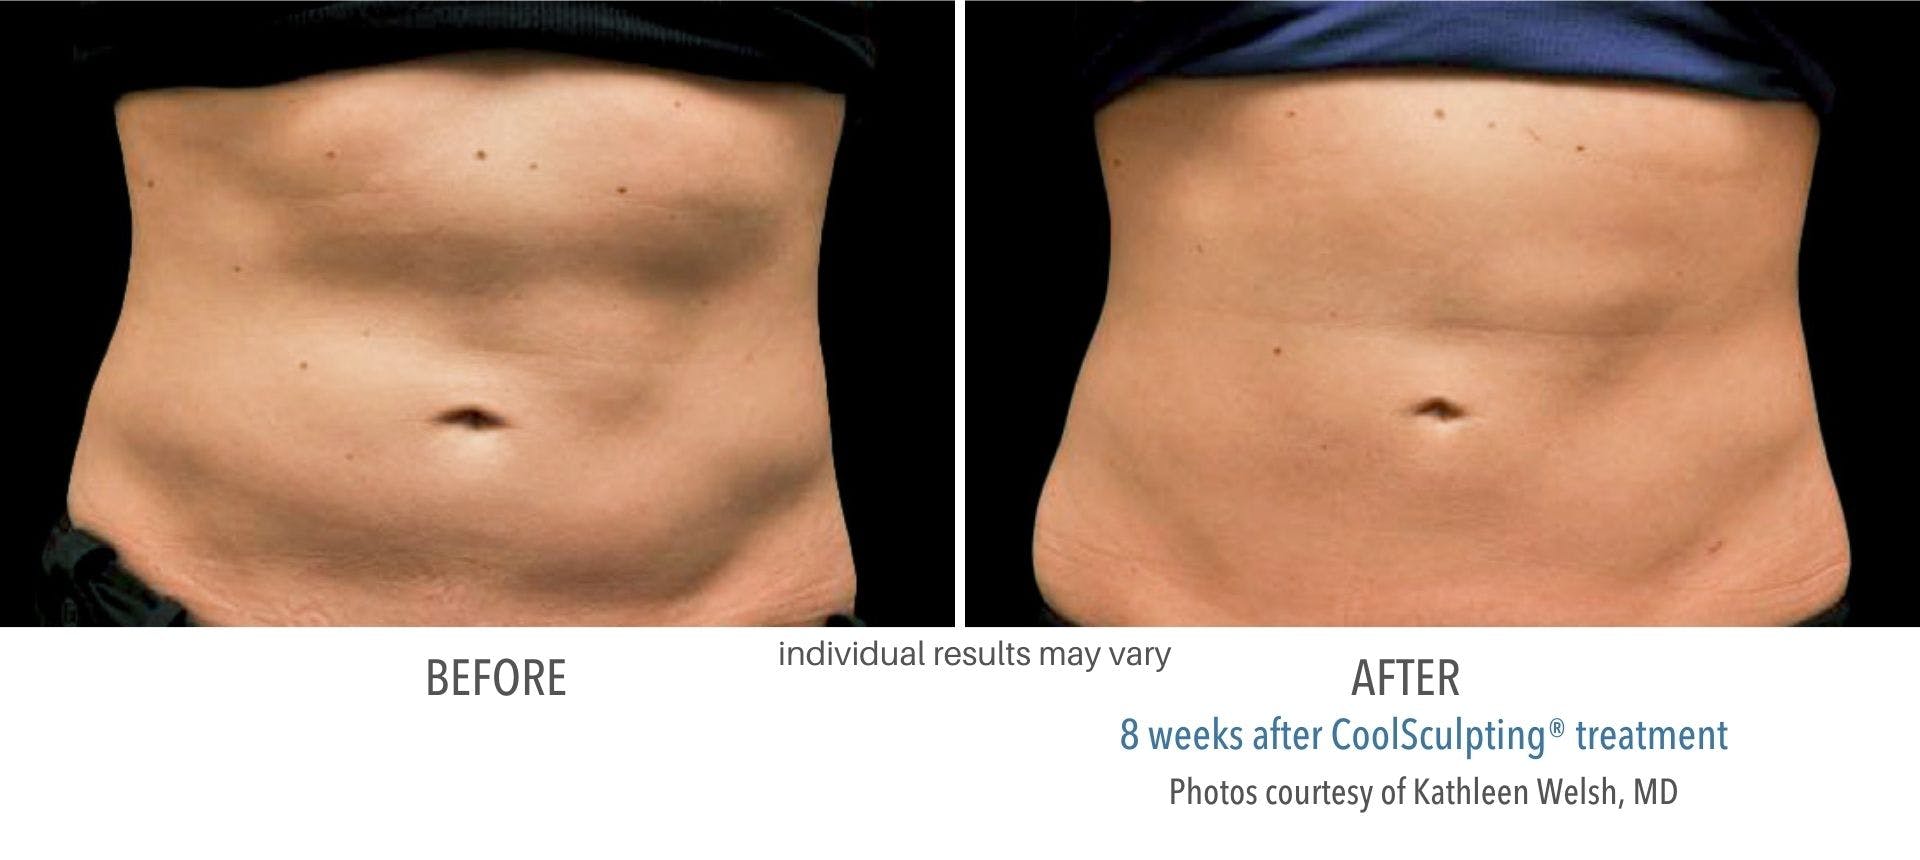 Coolsculpting results before and after treatment in Chicago.